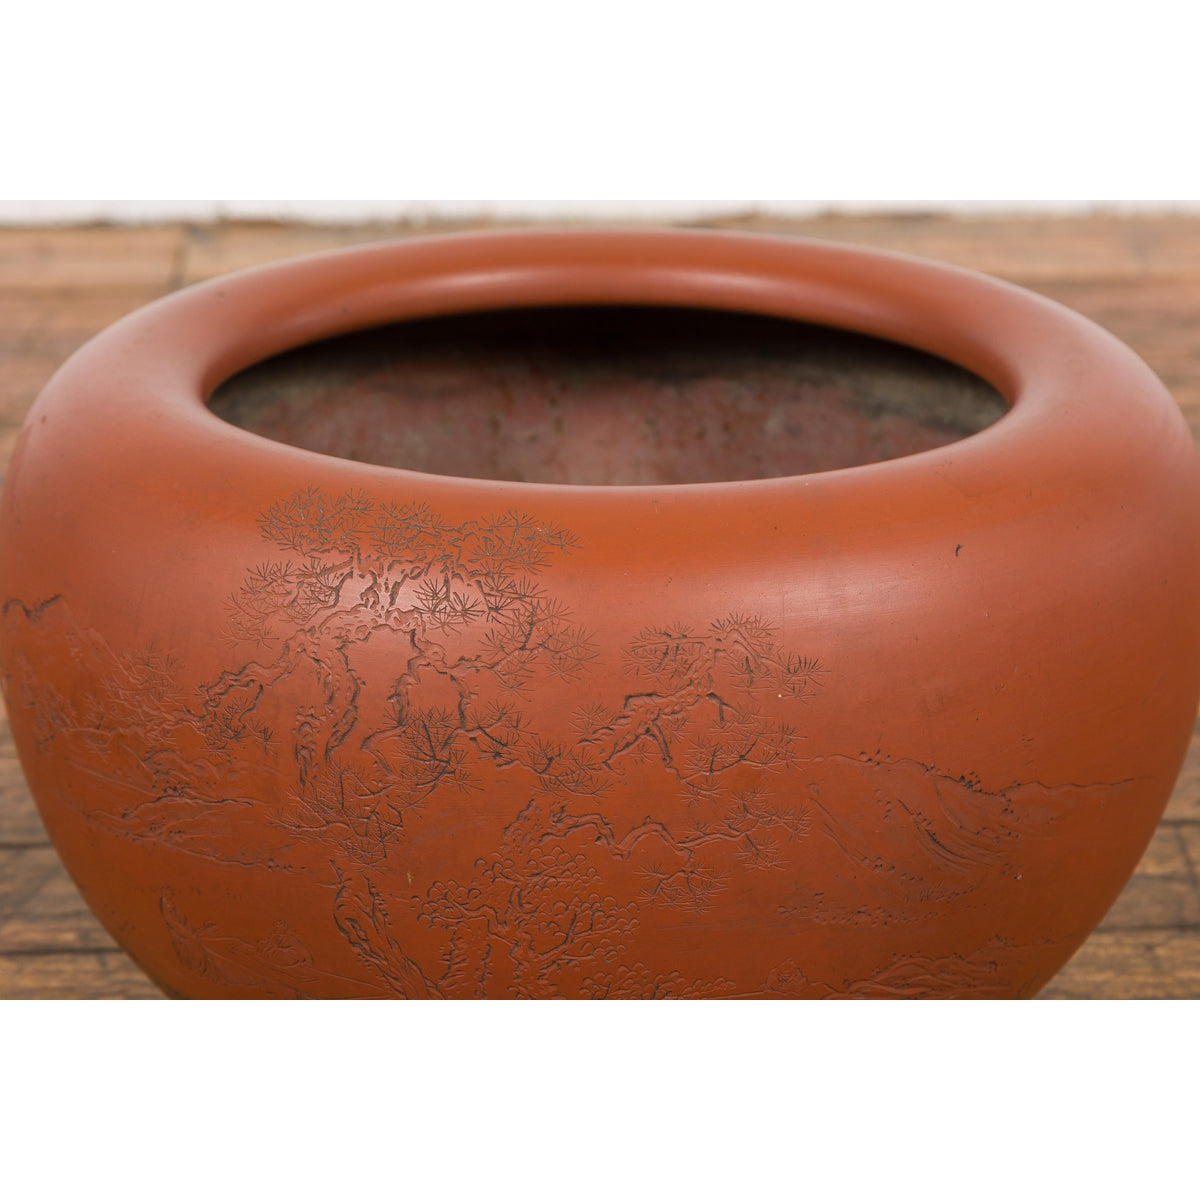 Orange Circular Antique Planter with Etched Design-YN7819-5. Asian & Chinese Furniture, Art, Antiques, Vintage Home Décor for sale at FEA Home